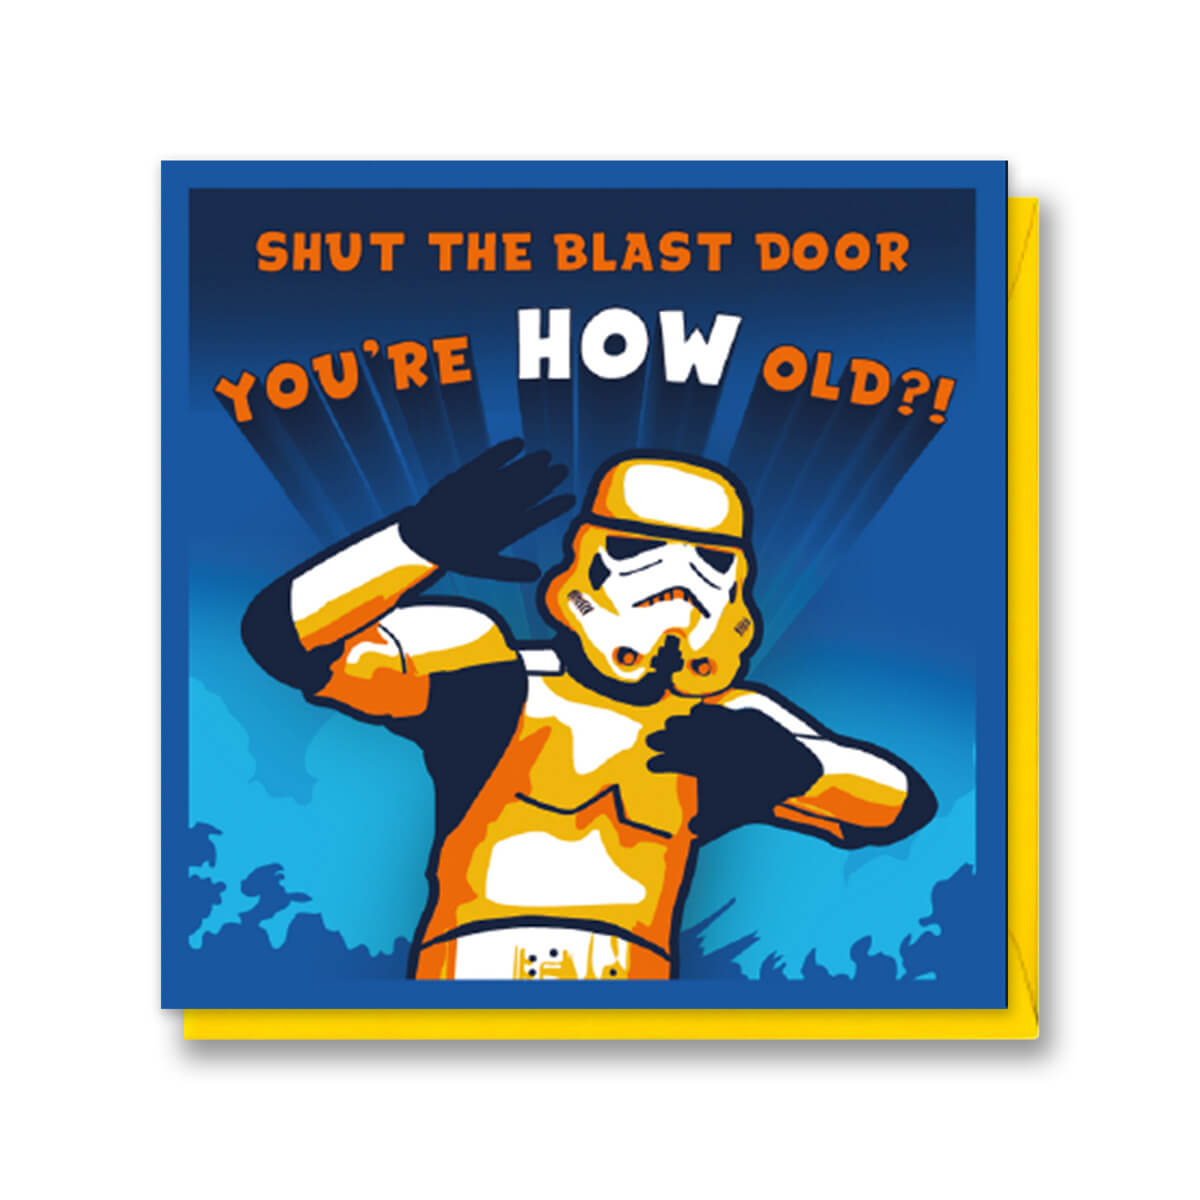 Original Stormtrooper funny birthday card for him - card reads 'Shut The Blast Door, You're HOW old?'